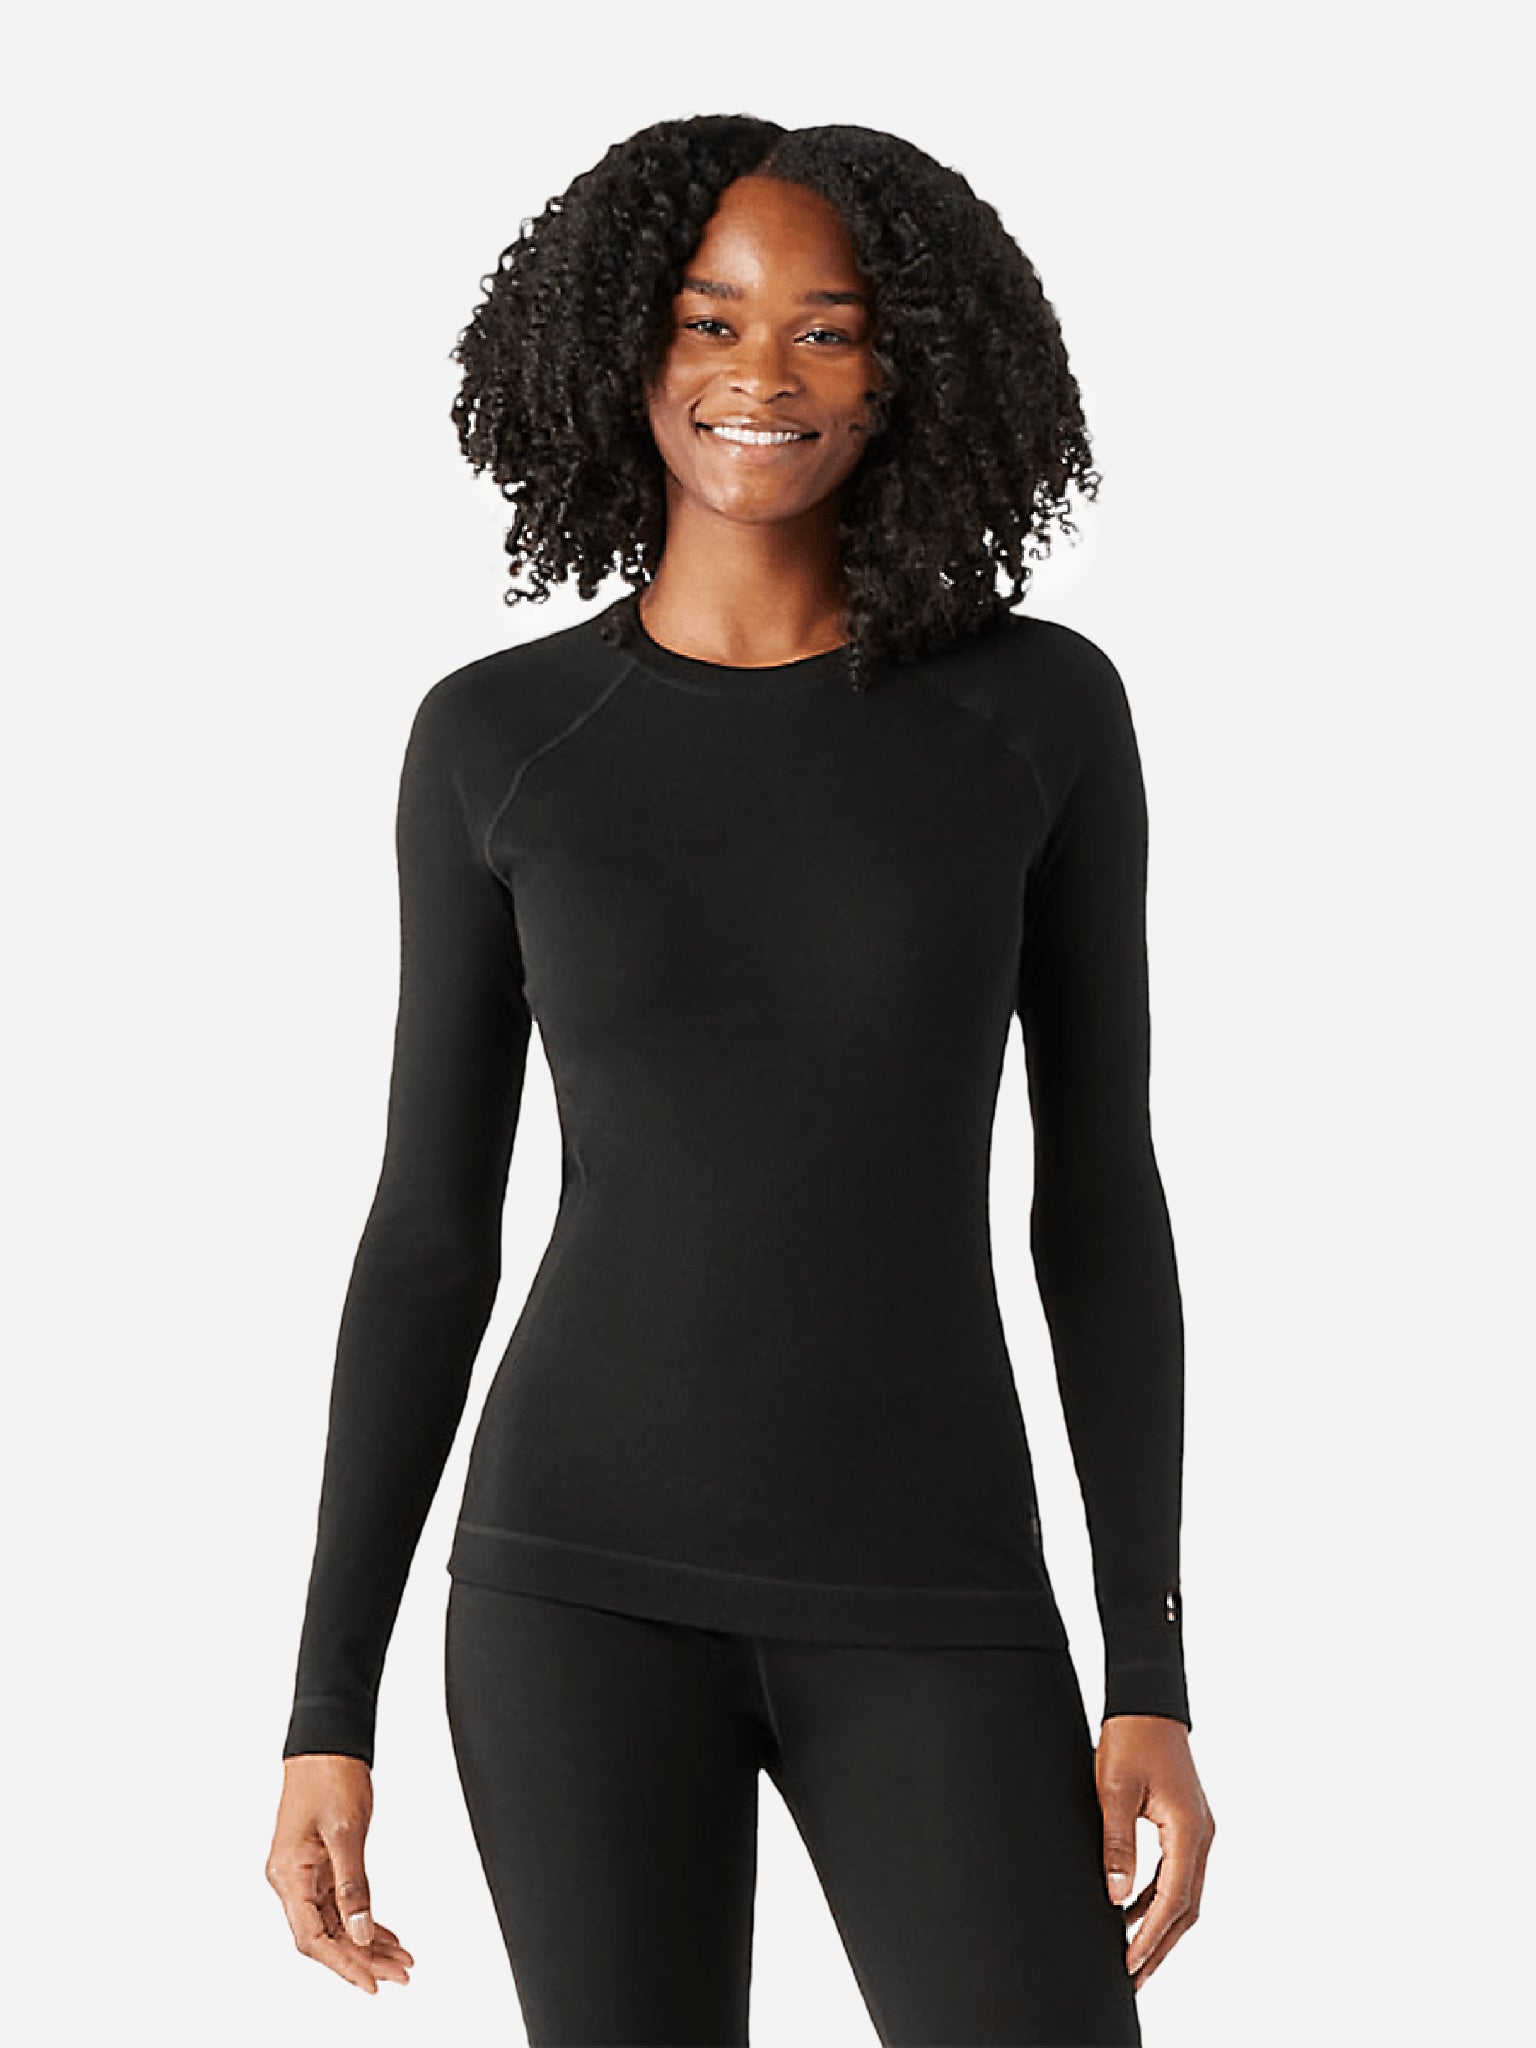 Smartwool Women's Base Layer Tops